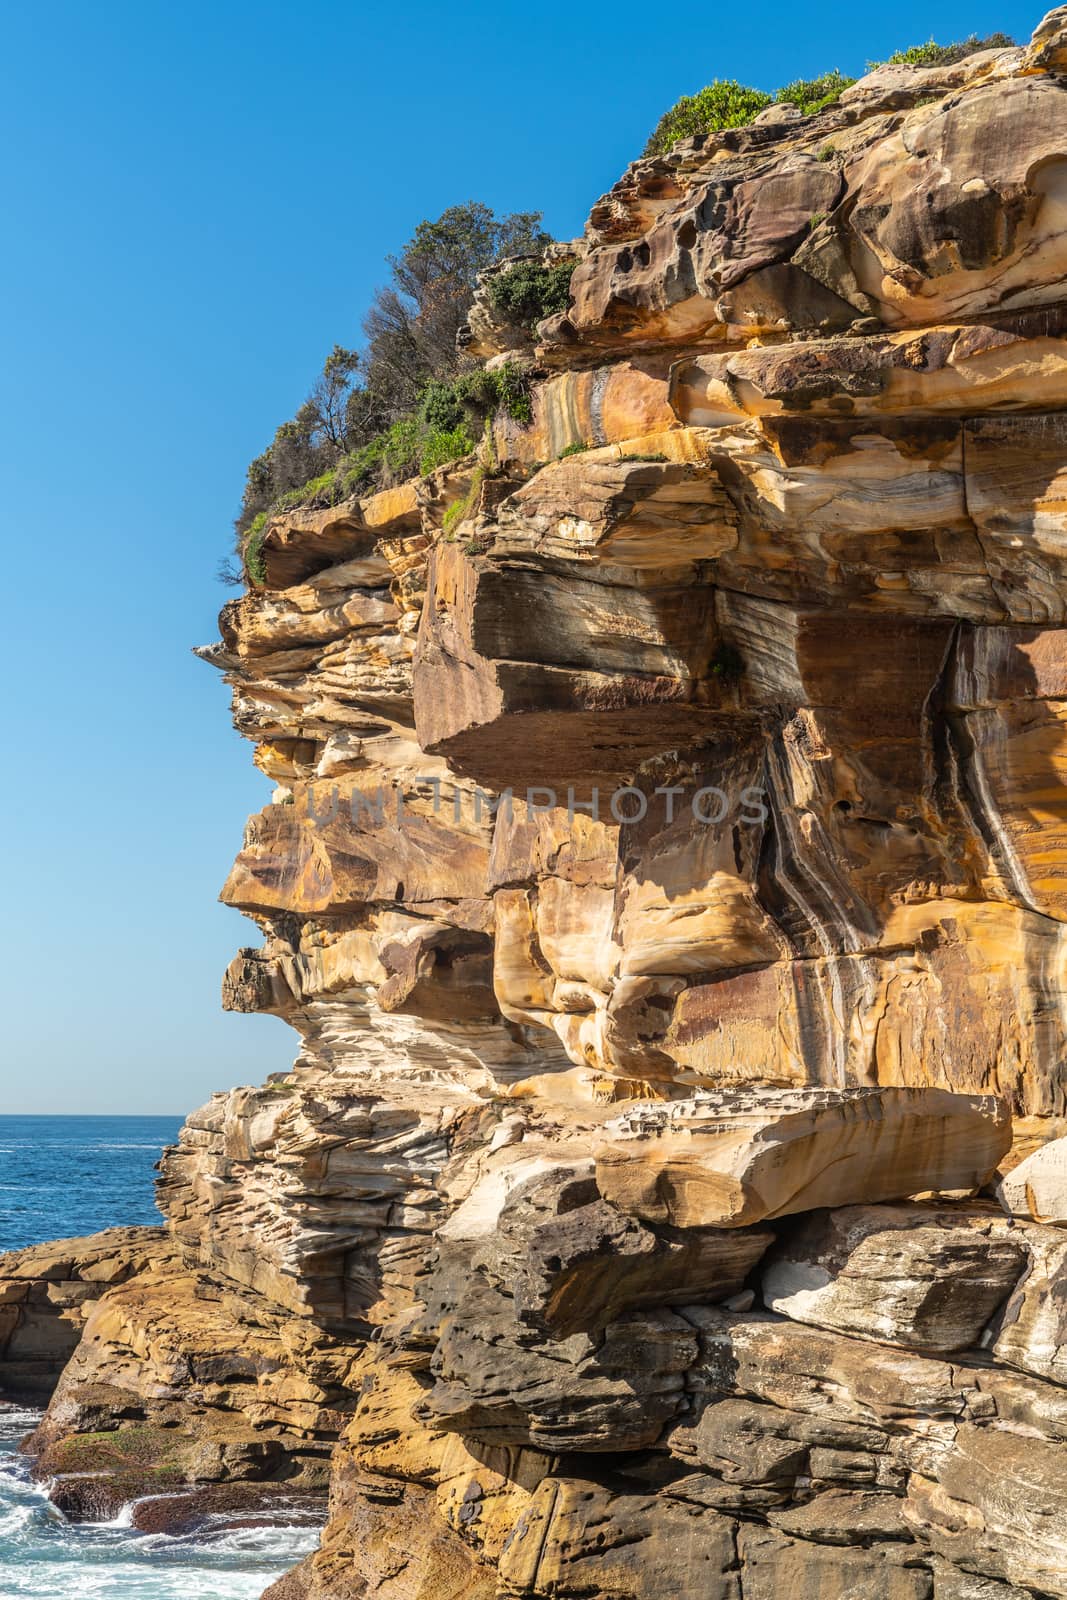 Sydney, Australia - February 11, 2019: Closeup of Spectacular rock outcrop at Bronte Beach South cliffs, made by erosion.. Yellows and browns under blue sky. Sponge-like borders of shell like plates sticking out.